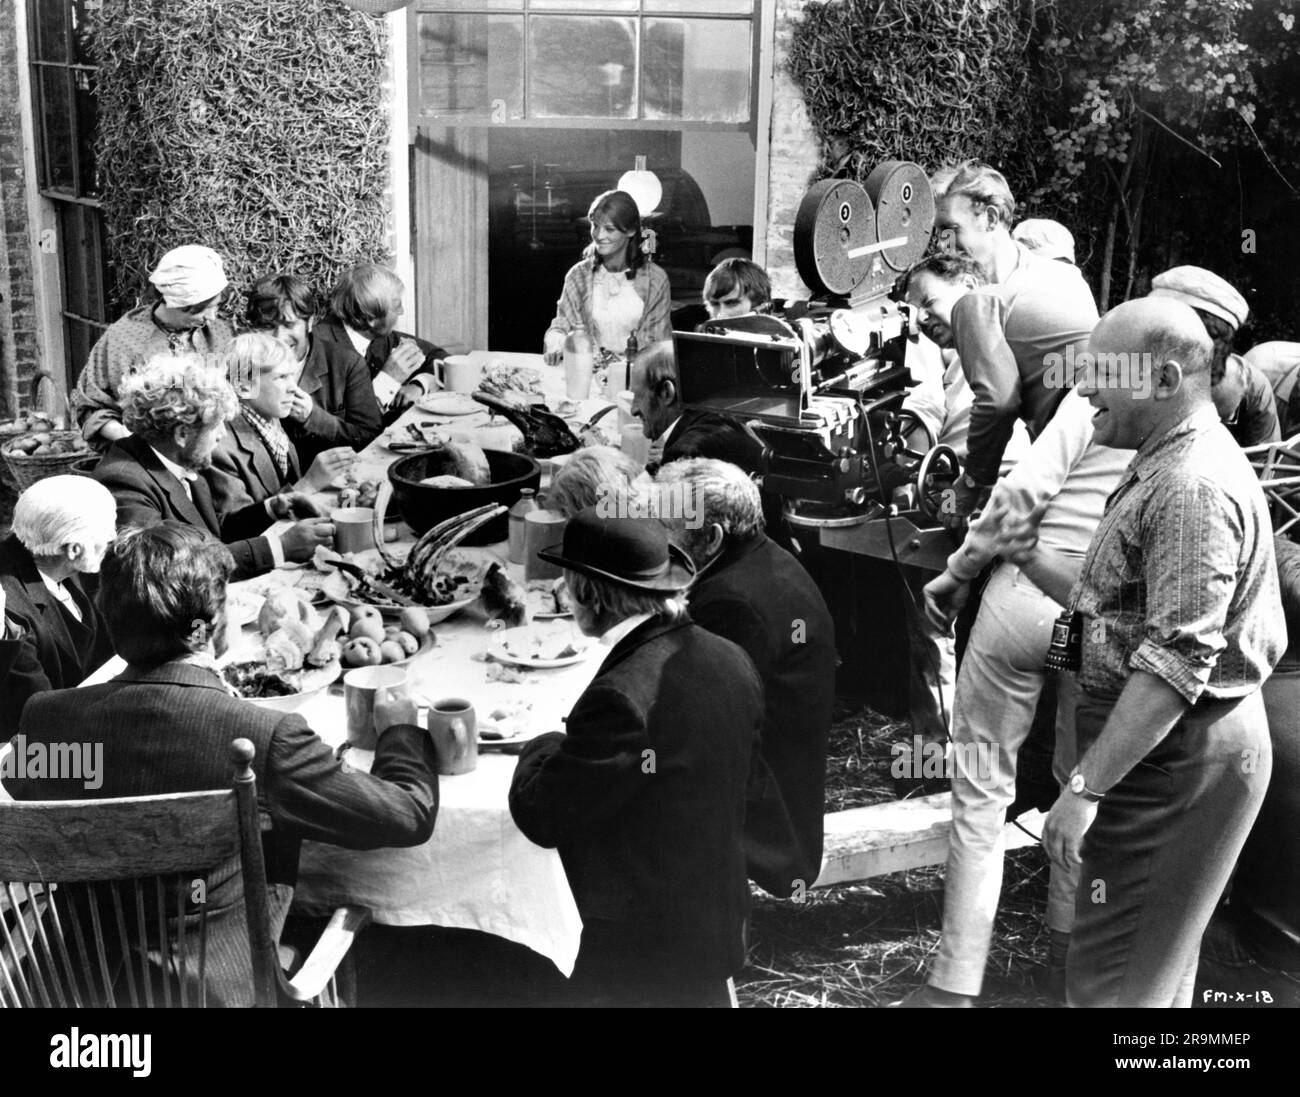 ALAN BATES (back to camera) JULIE CHRISTIE Director JOHN SCHLESINGER and Movie / Film Crew on set location candid during filming of FAR FROM THE MADDING CROWD 1967 director JOHN SCHLESINGER novel Thomas Hardy screenplay Frederic Raphael cinematographer Nicolas Roeg Vic Films Productions / Metro Goldwyn Mayer Stock Photo